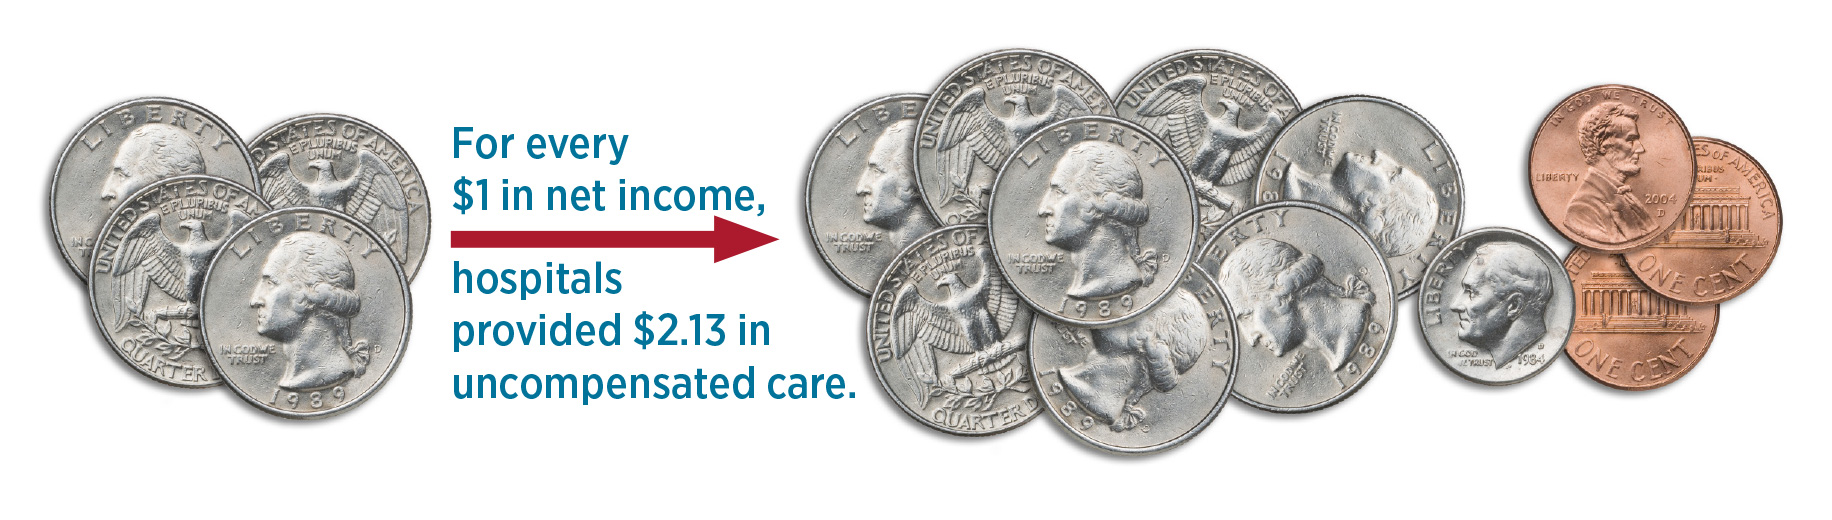 for every $1 in net income, hospitals provided $2.13 in uncompensated care in 2020, an increase from $1.54 in 2019